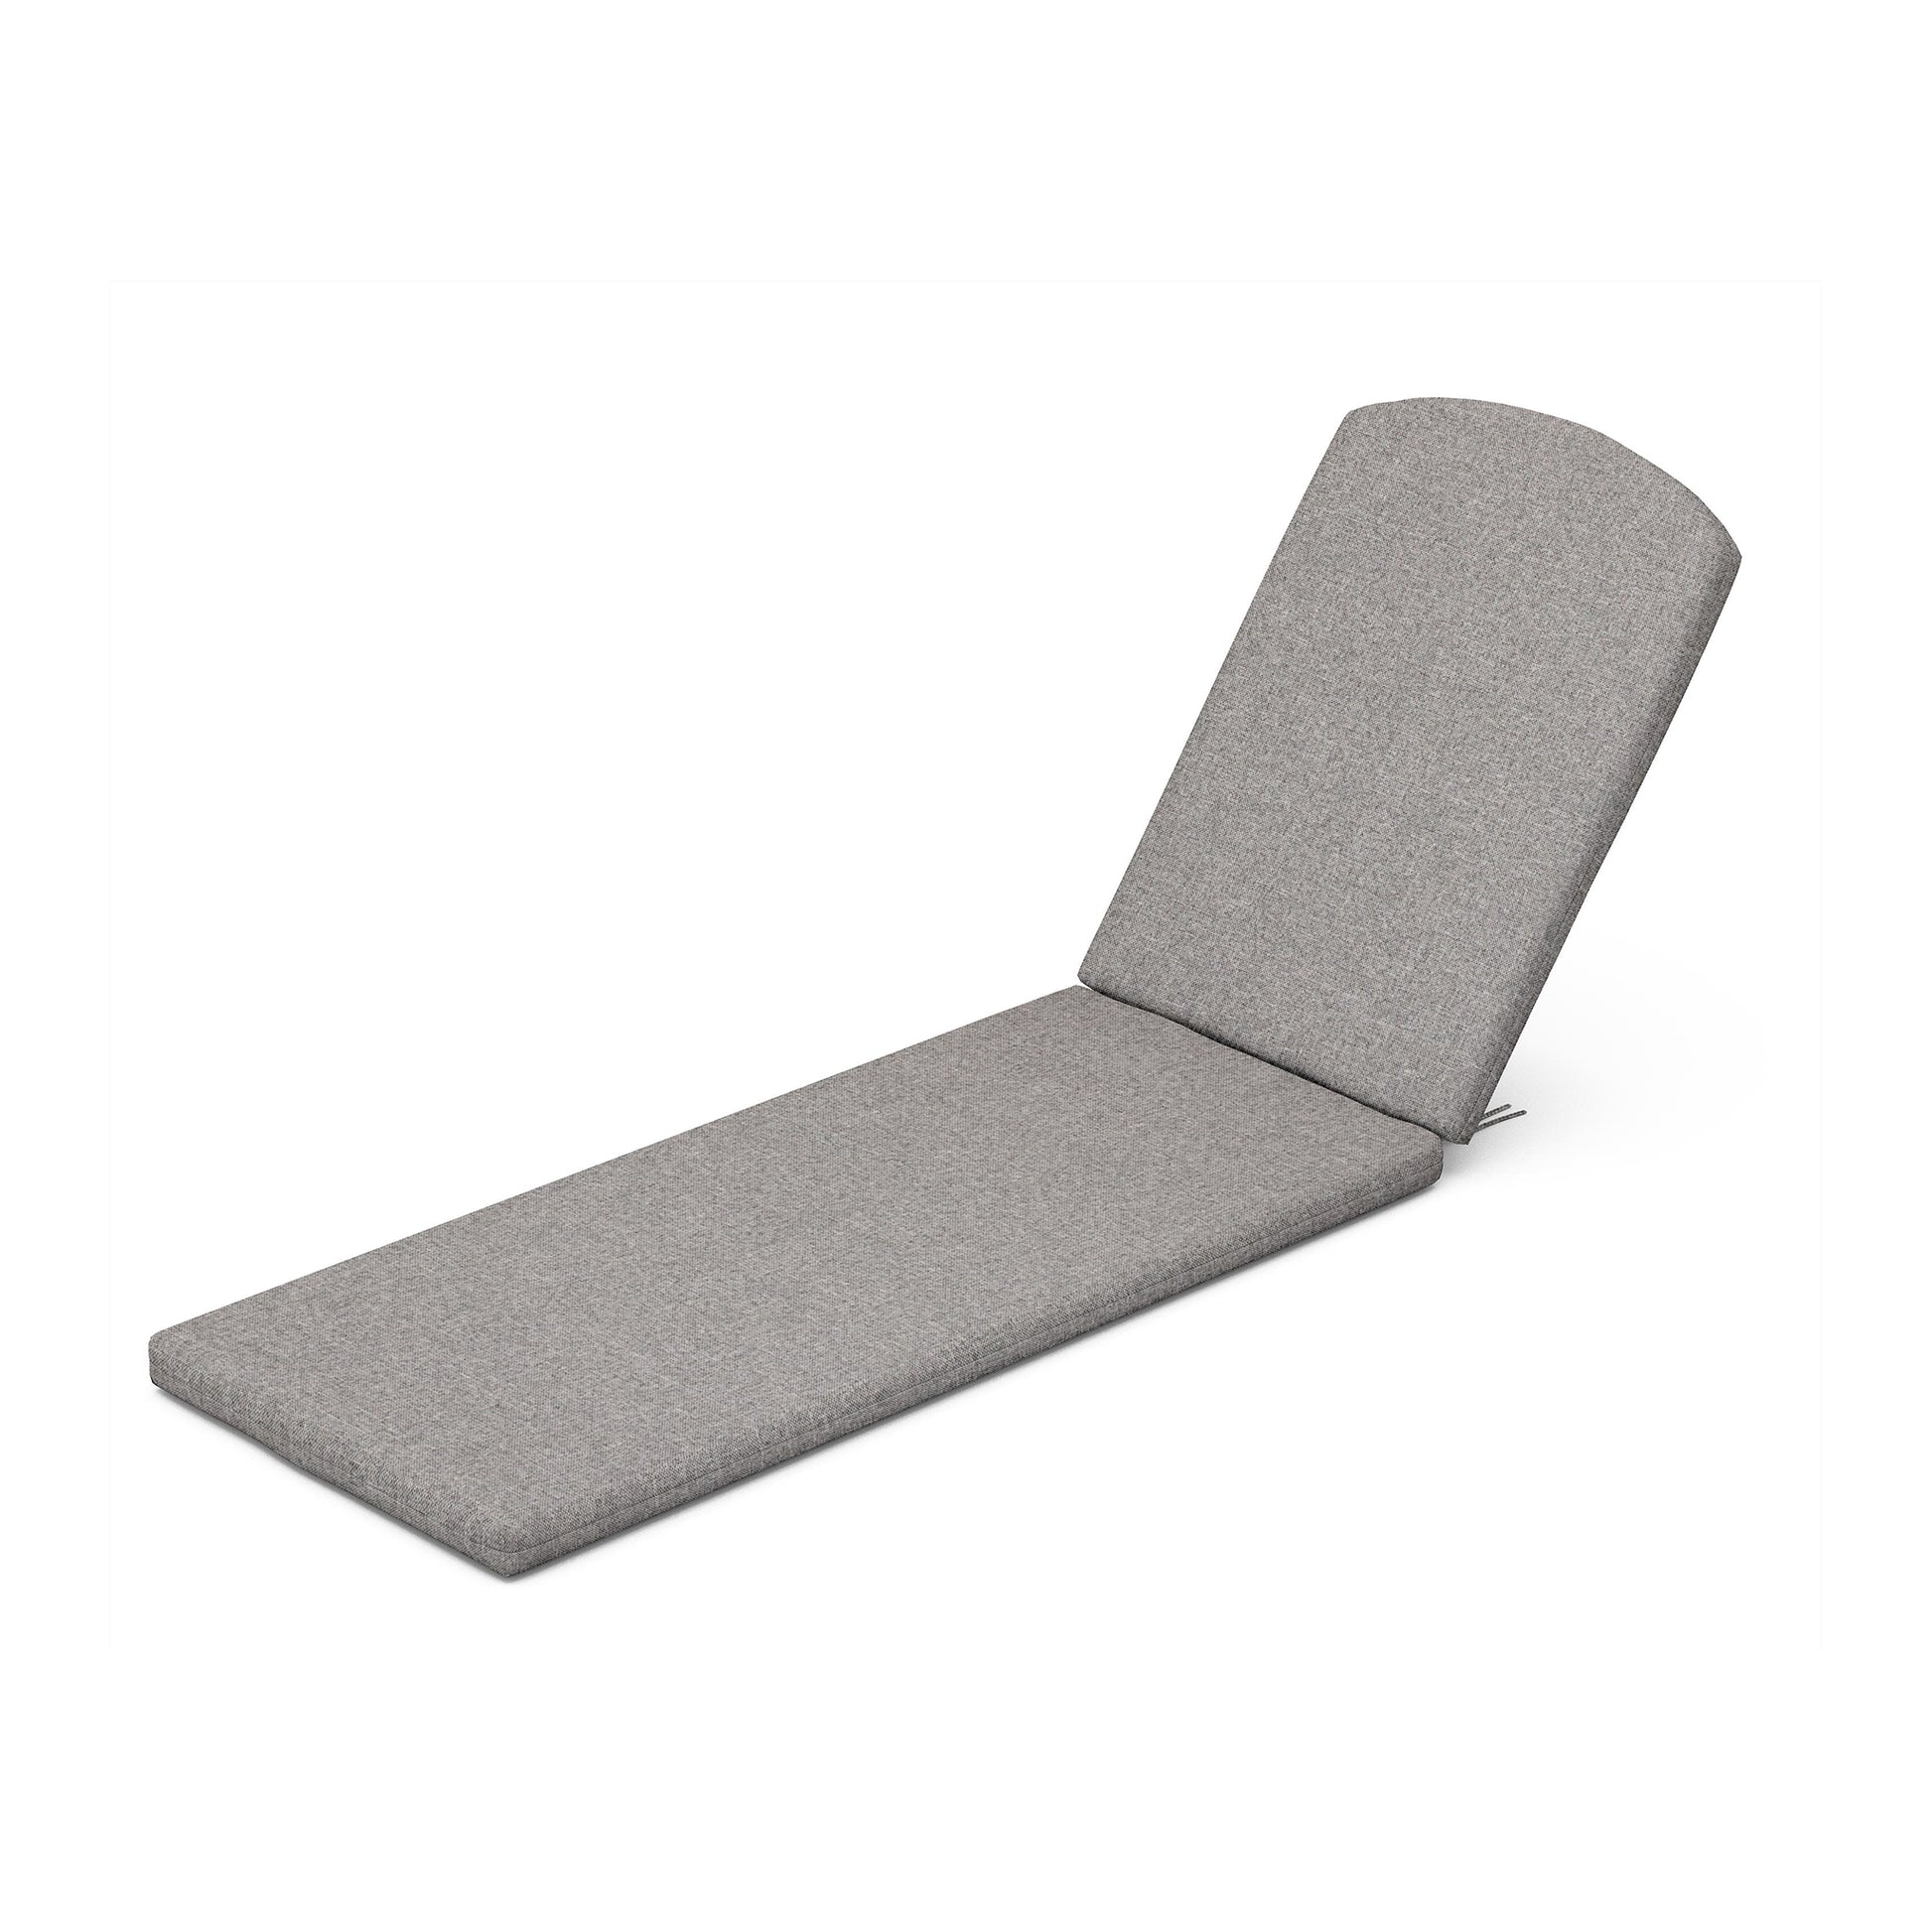 A comfortable grey chaise lounge with weather-resistant POLYWOOD upholstery fabric on a white background.